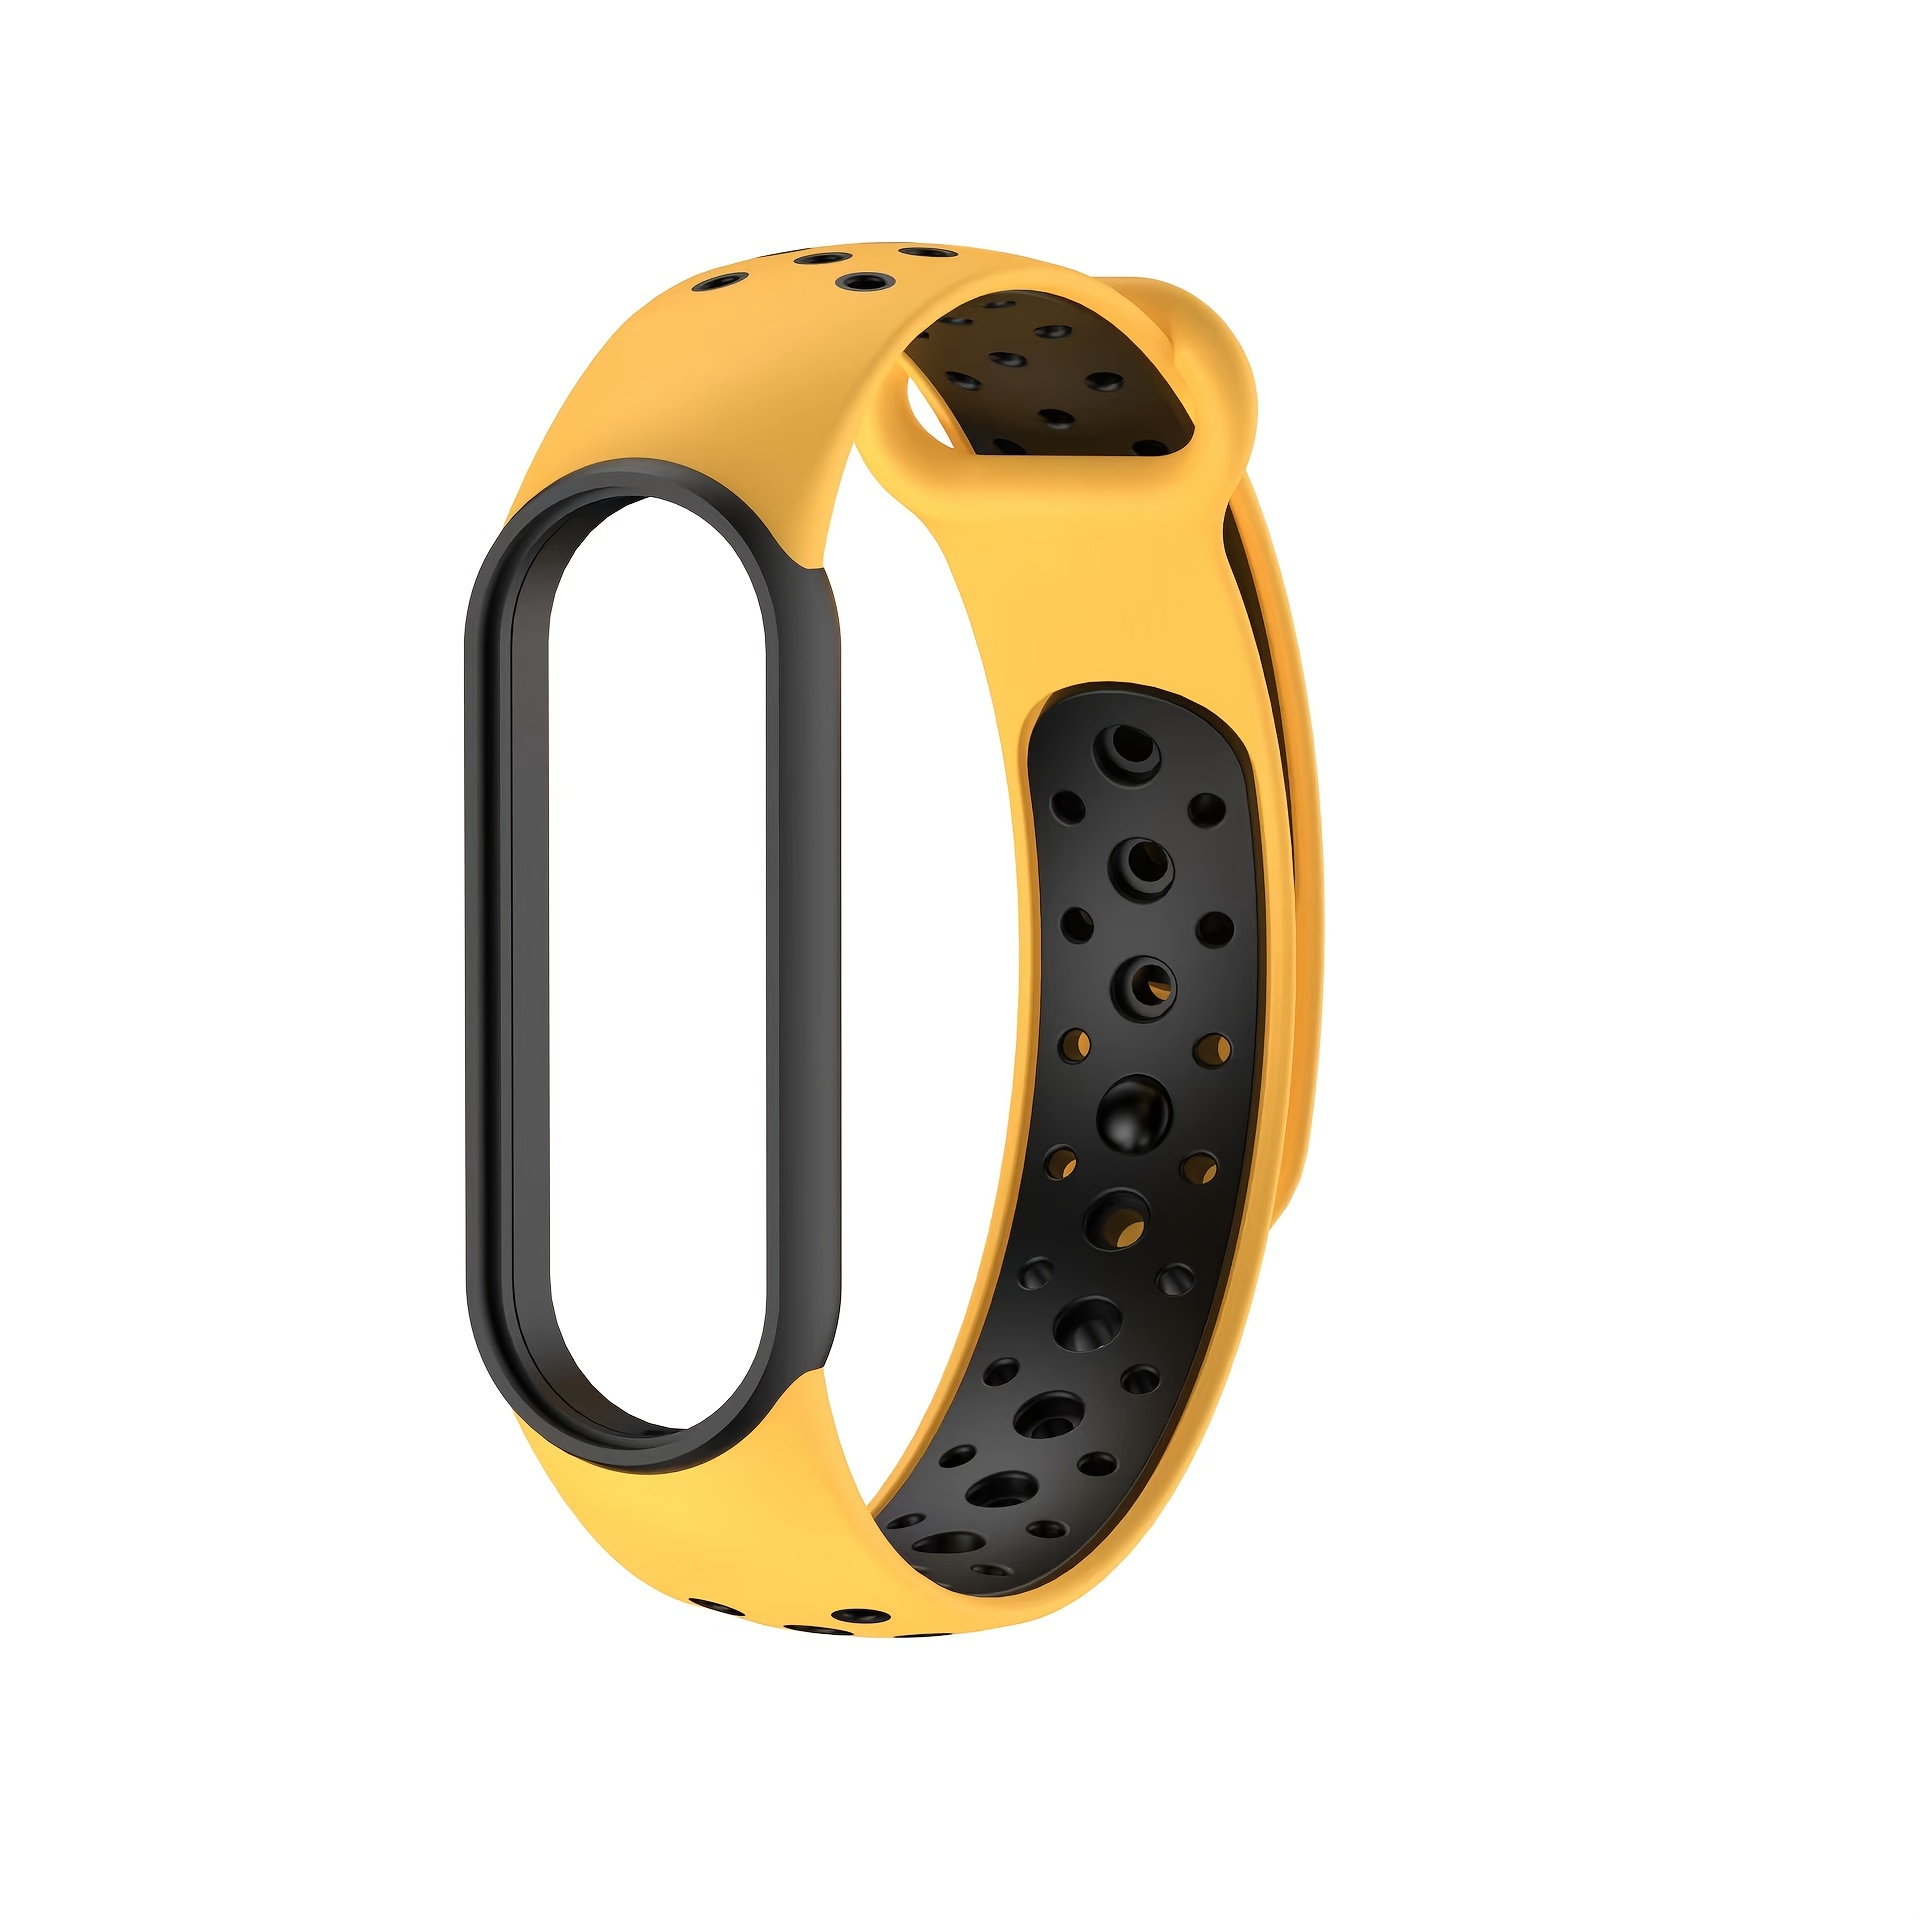  MIJOBS Strap for Mi Band 7 Mi Band 6, Replacement Wristband for Xiaomi  Mi Band 5 Mi Band 4 Mi Band 3 Silicone Sport Wrist Strap for Xiaomi Mi Band  5 : Cell Phones & Accessories